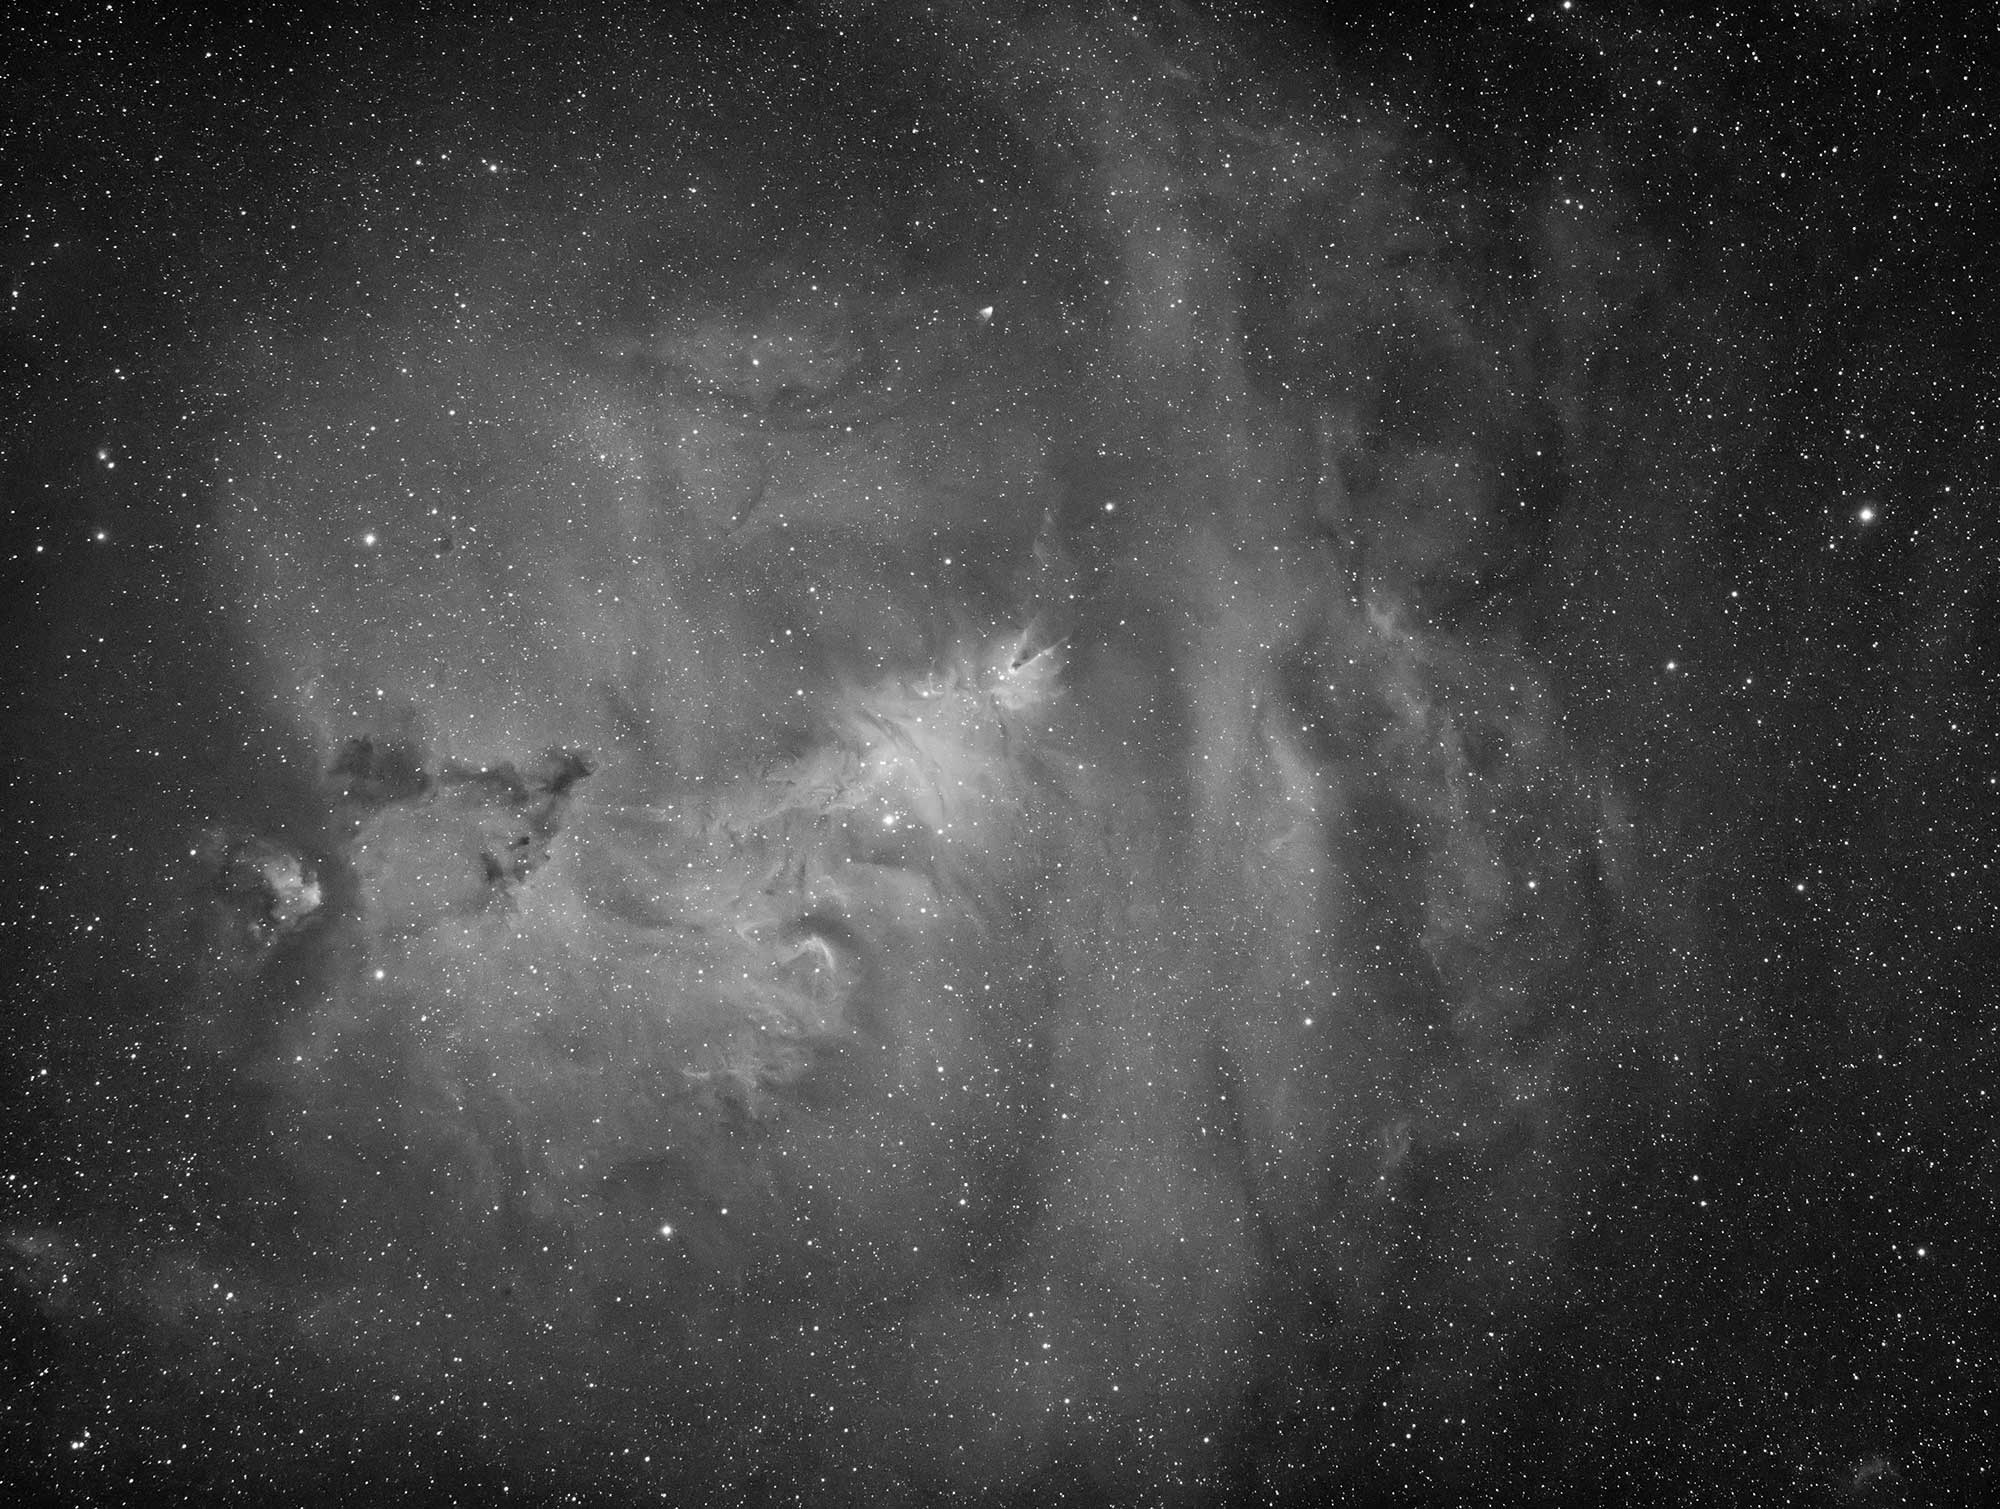 The Cone Nebula & Christmas Tree Cluster in hydrogen alpha using the Borg55fl - 2 hours of total integration time